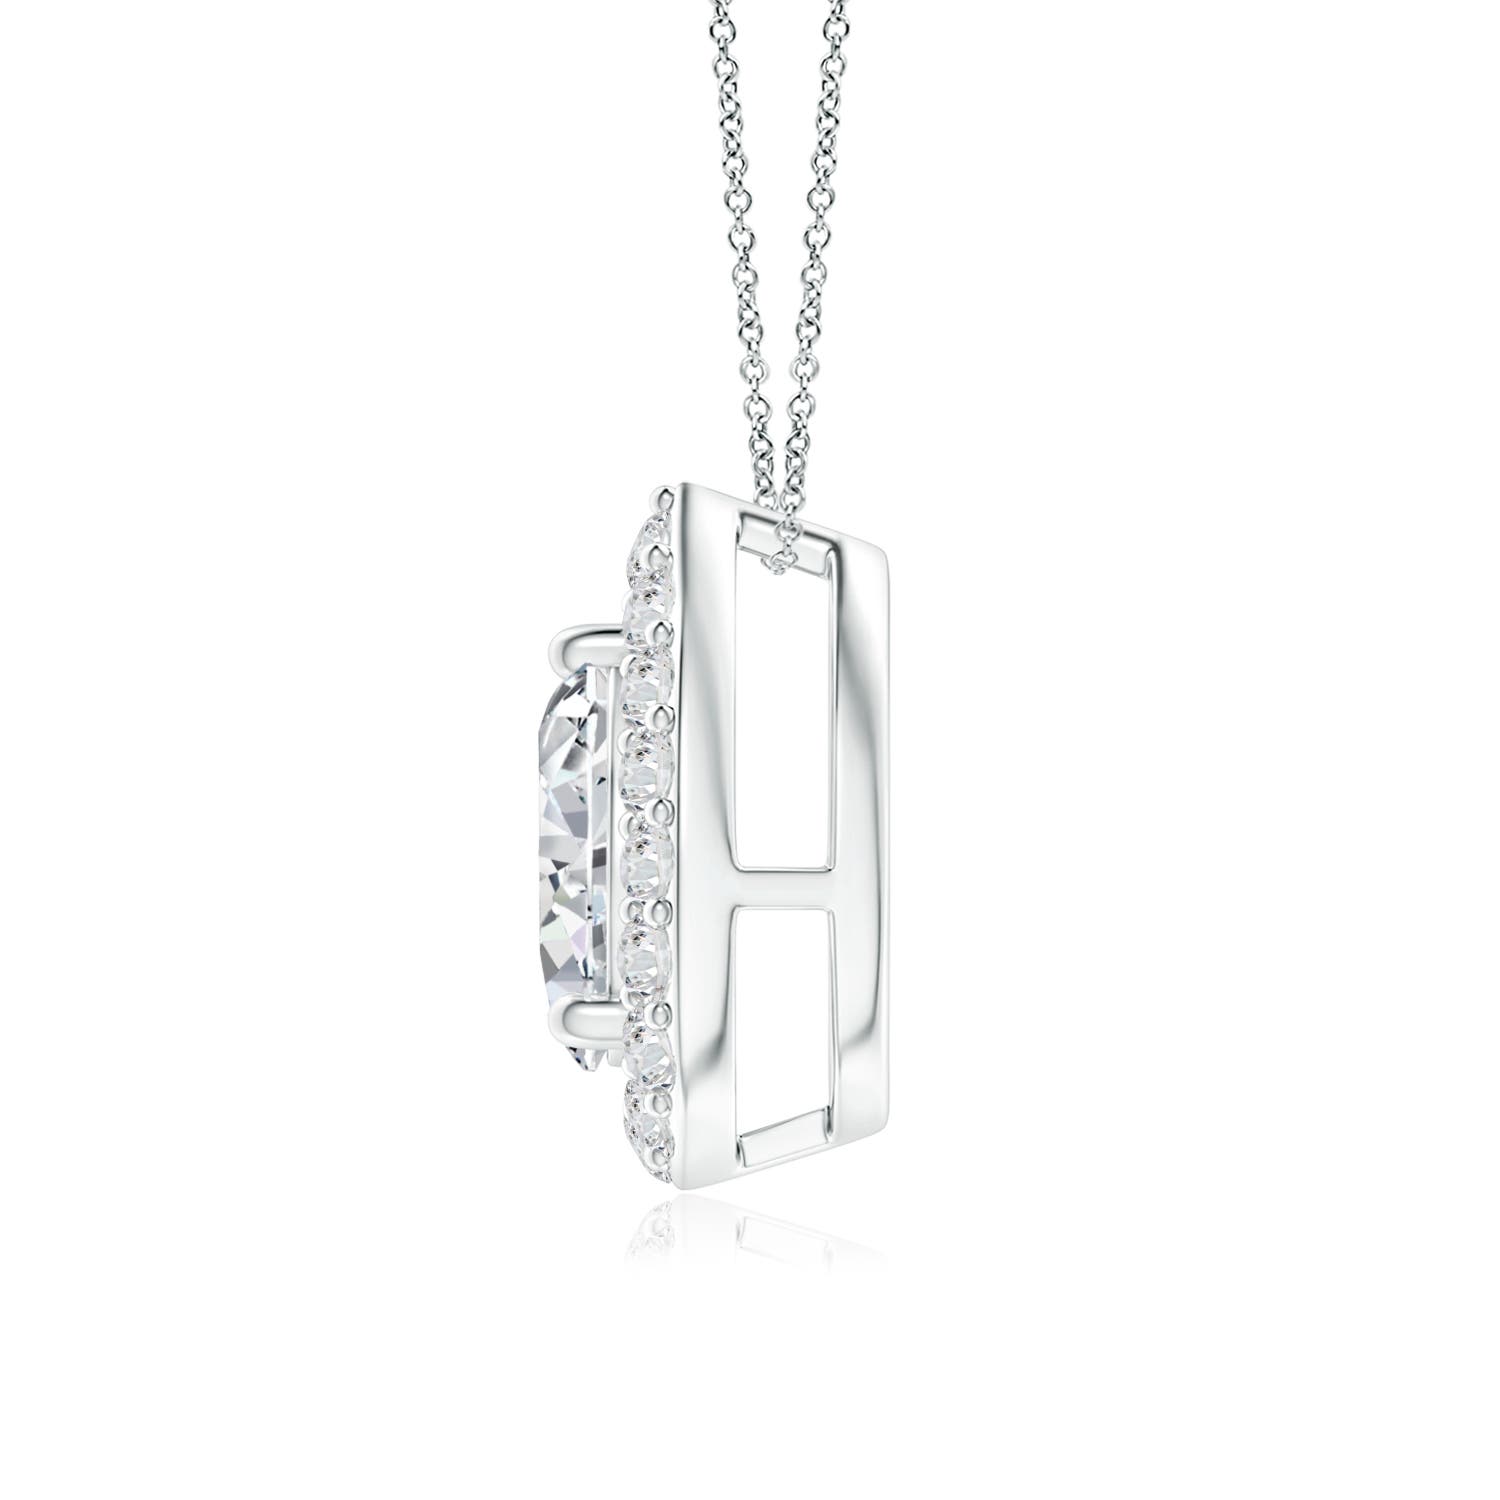 H, SI2 / 0.3 CT / 14 KT White Gold